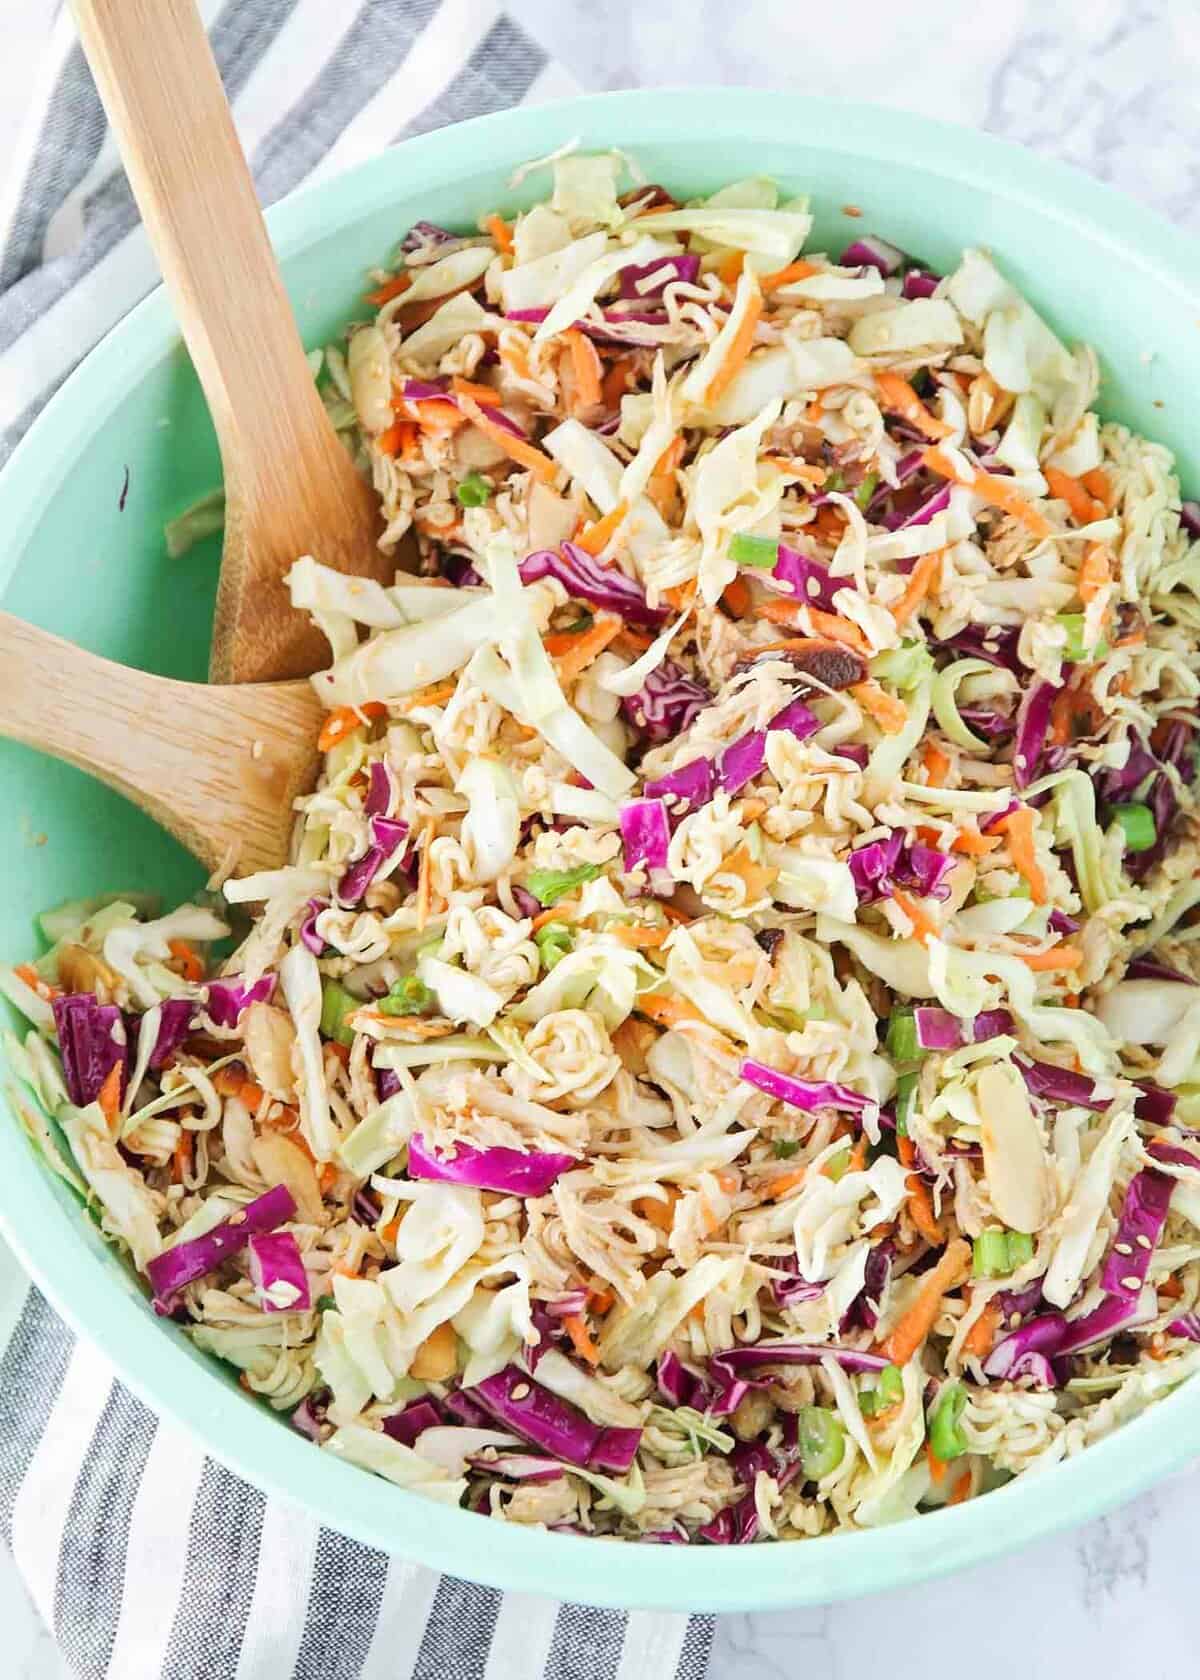 Ramen noodle cabbage salad in a green bowl with wooden spoons.